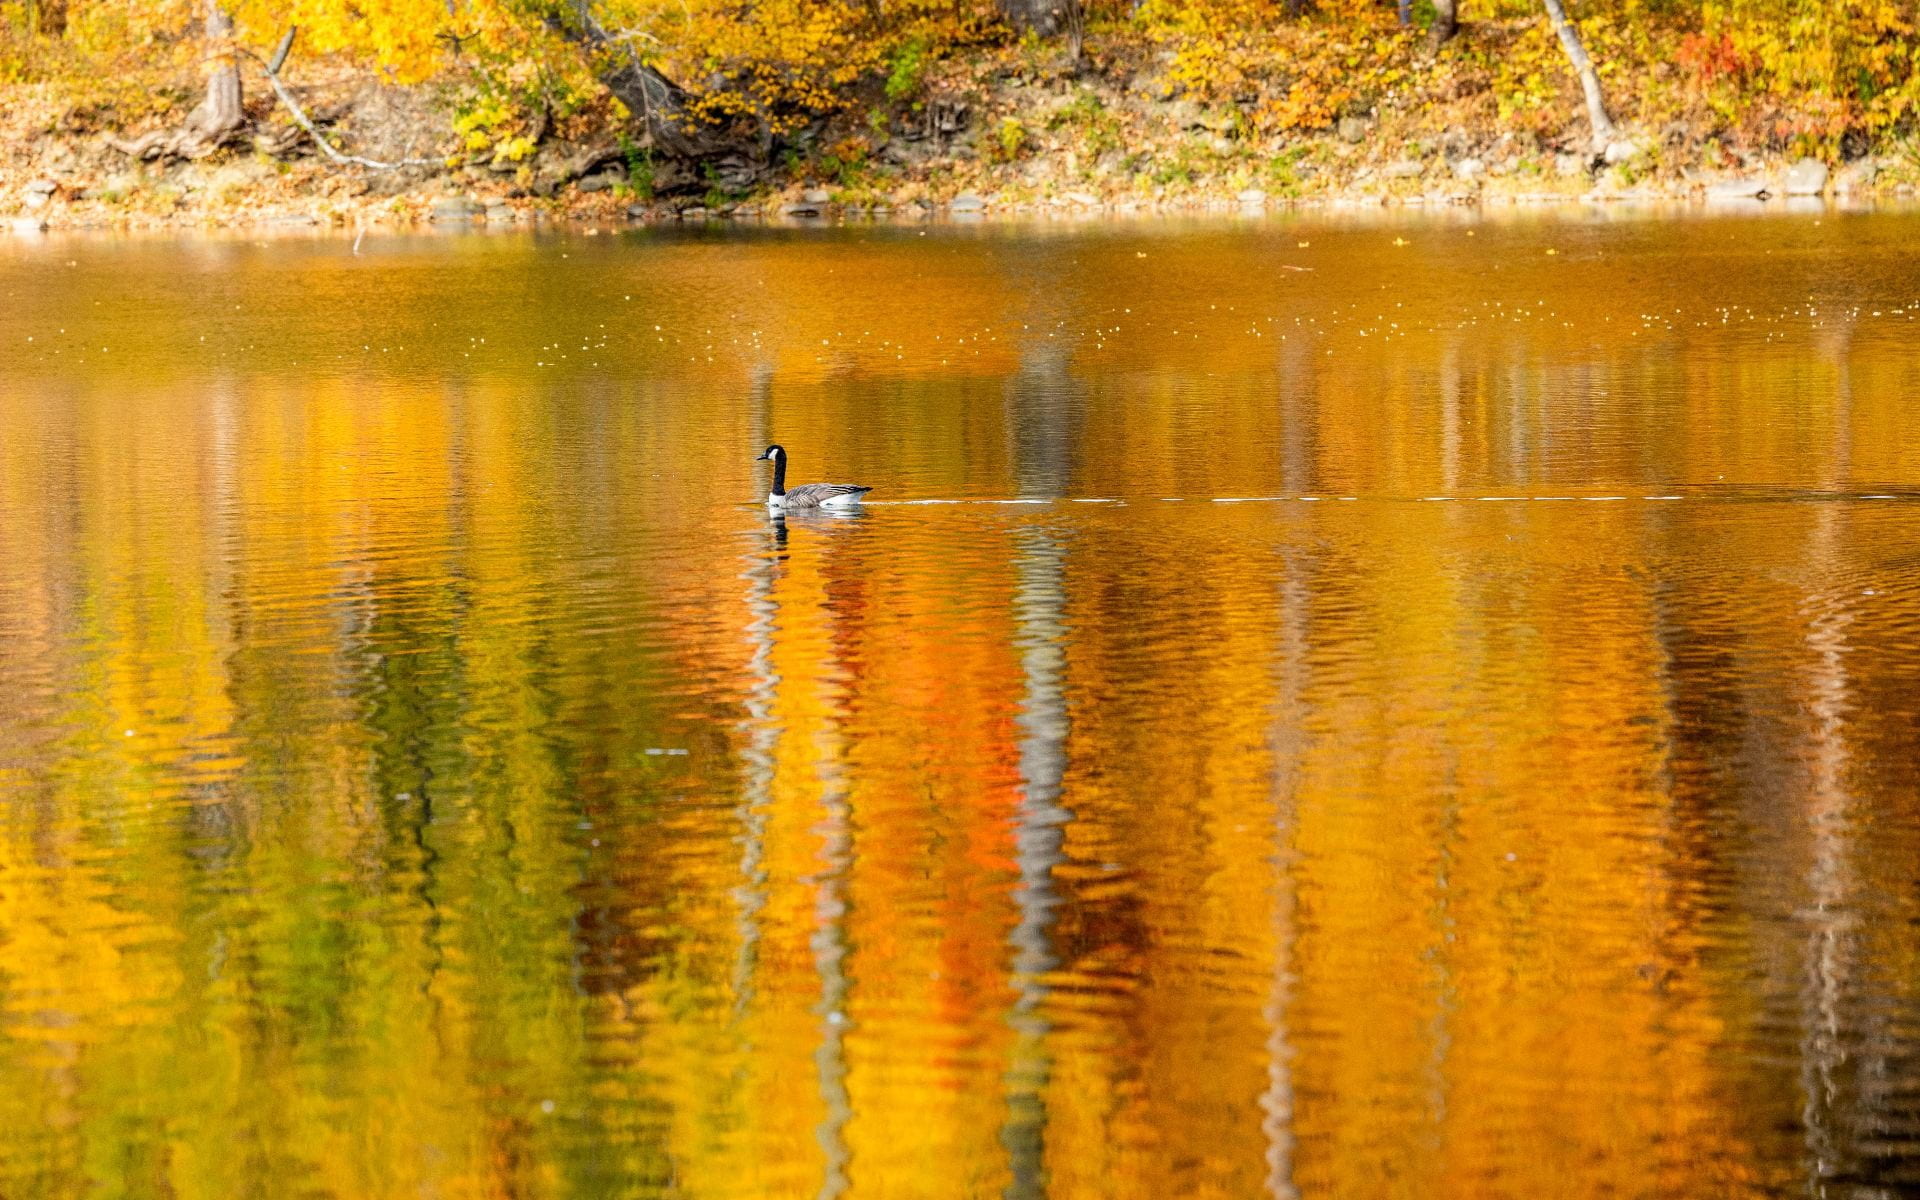 Goose floats on Beebe Lake on an Autumn afternoon.